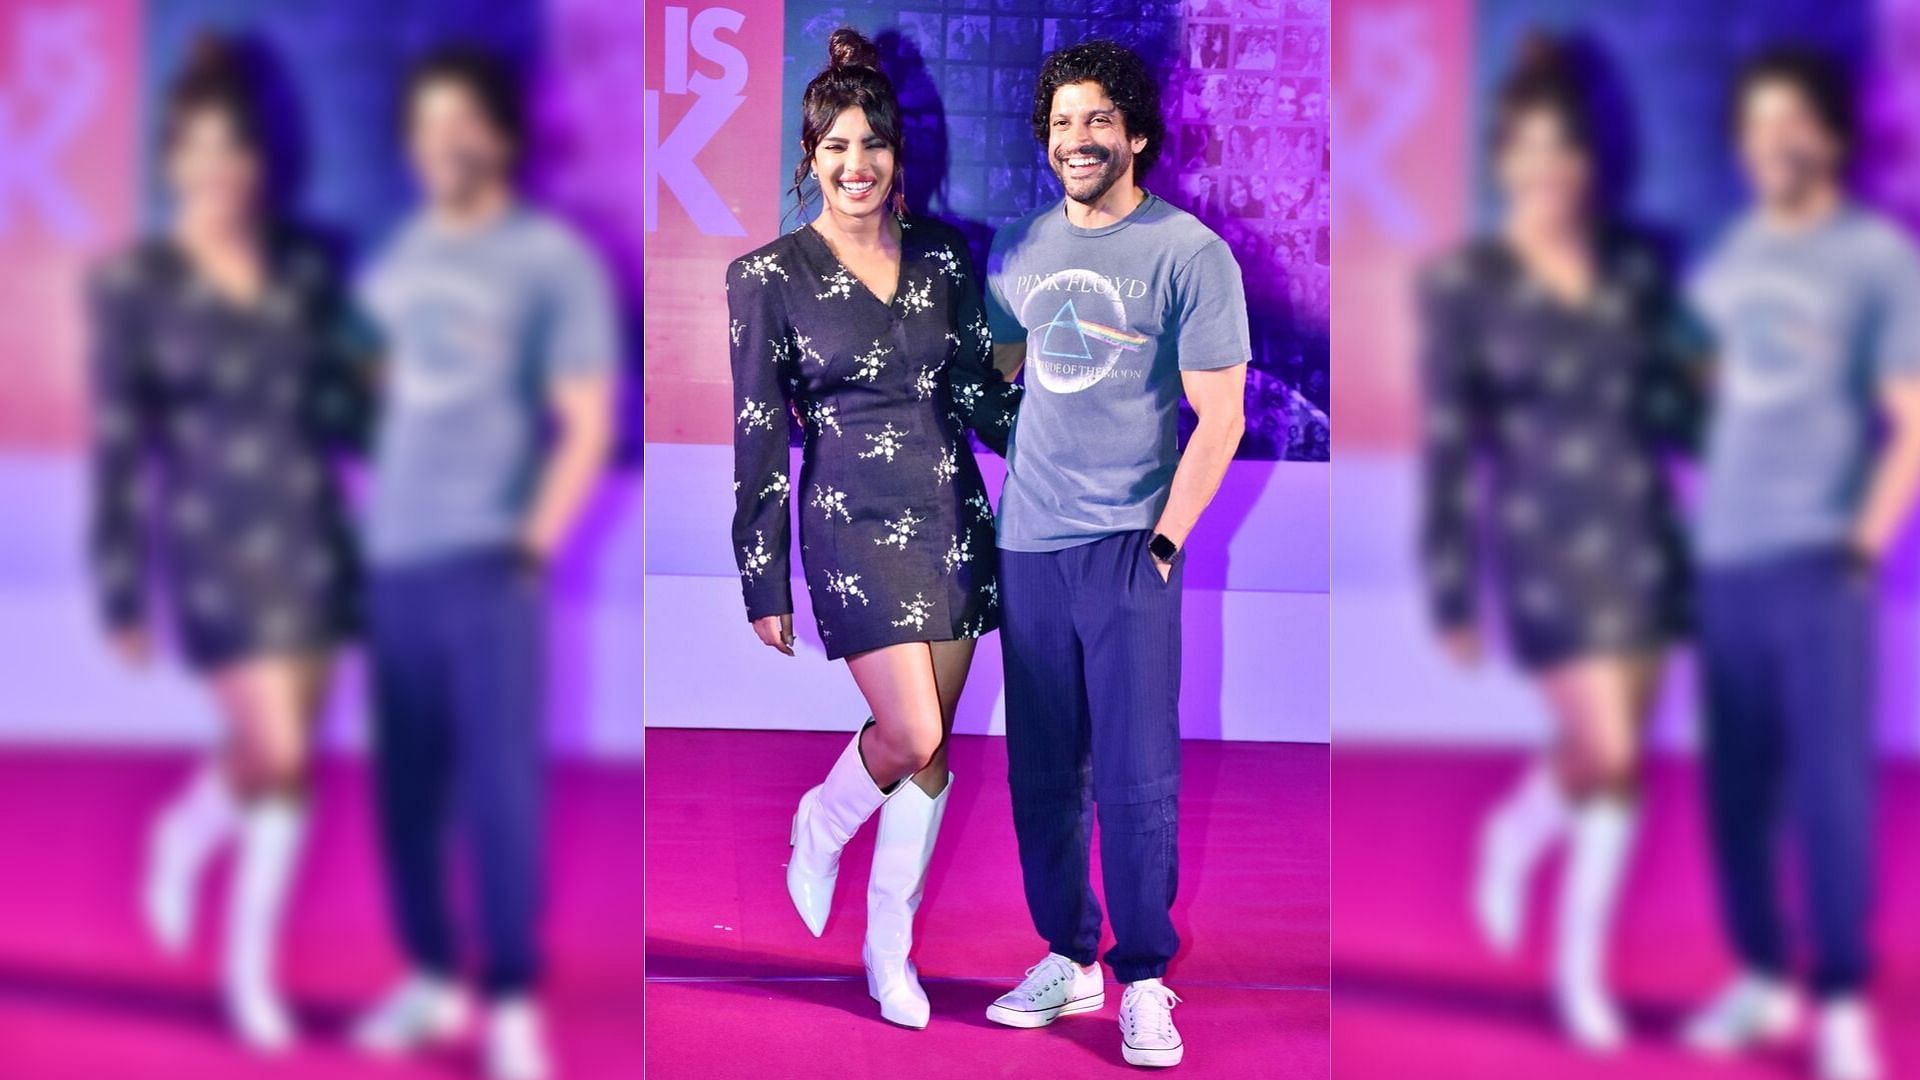 Priyanka Chopra and Farhan Akhtar inaugurate the Wall of Love as part of <i>The Sky is Pink</i> promotions.